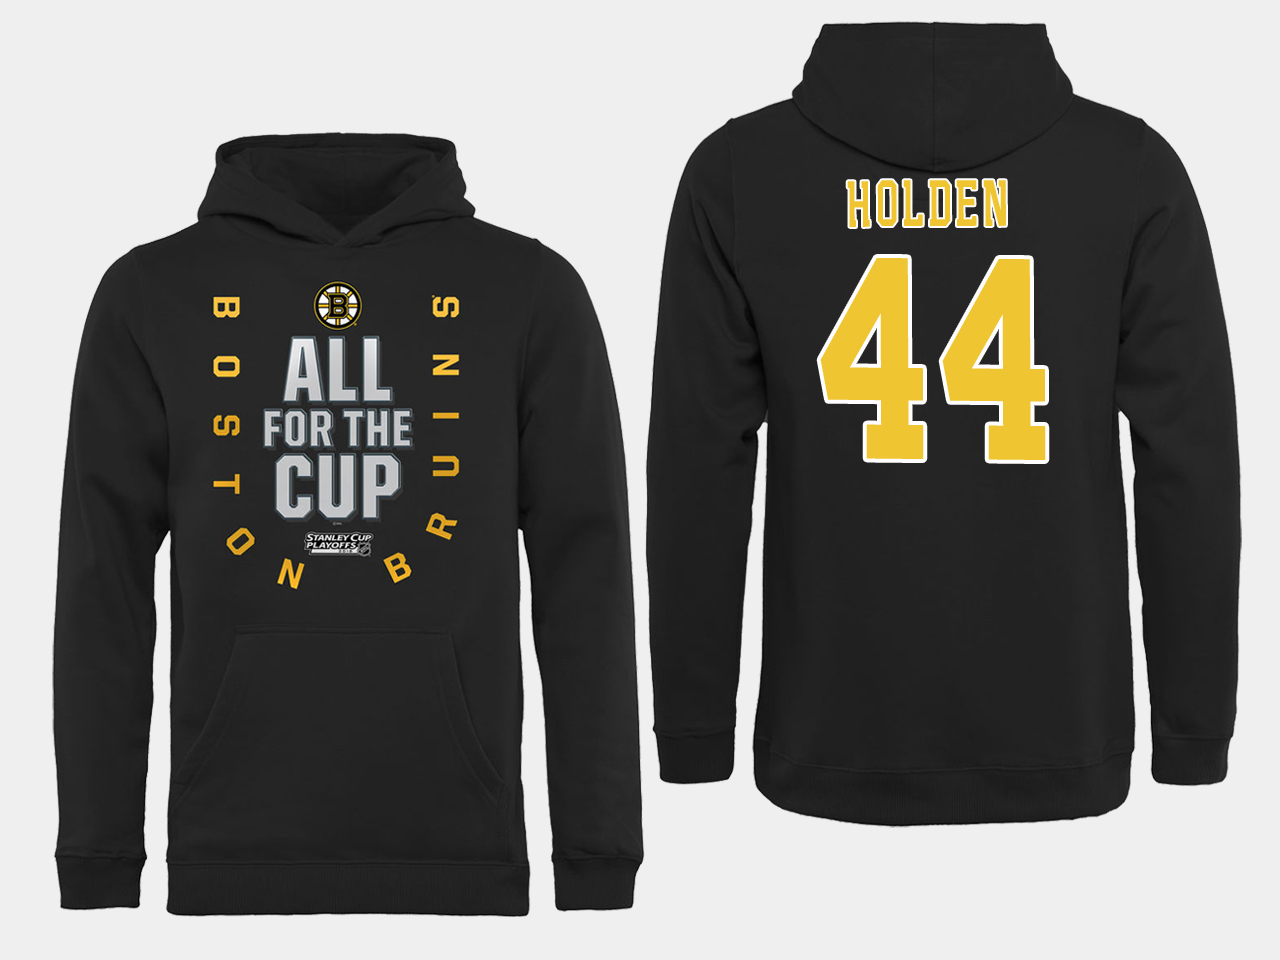 NHL Men Boston Bruins #44 Holden Black All for the Cup Hoodie